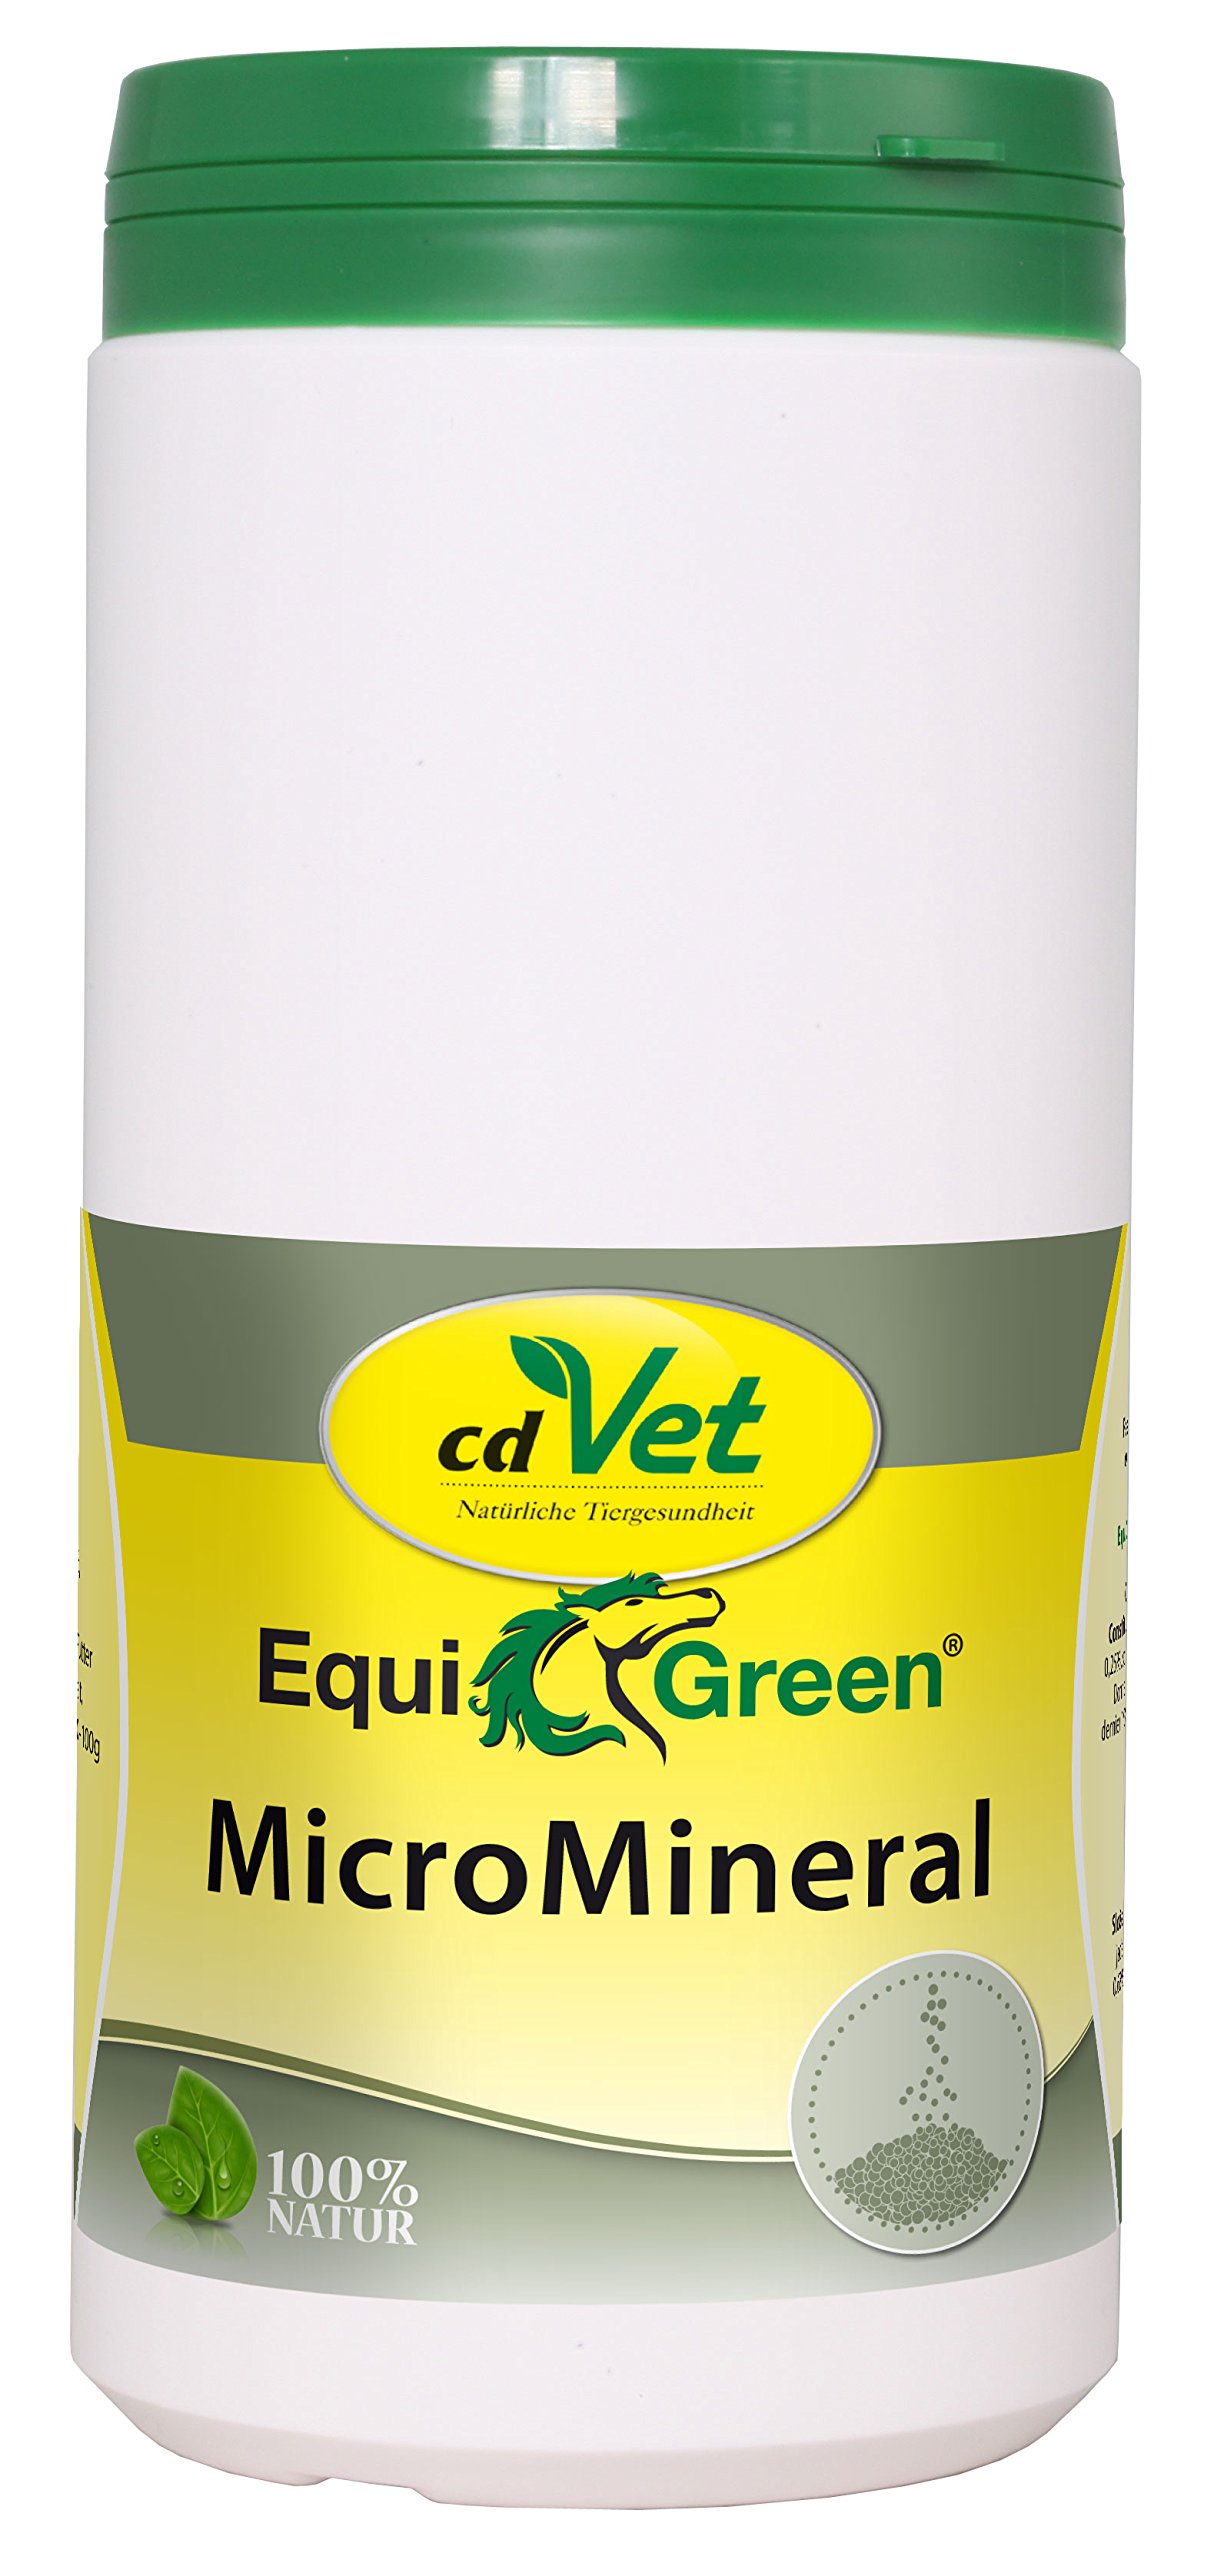 EquiGreen MicroMineral 1kg